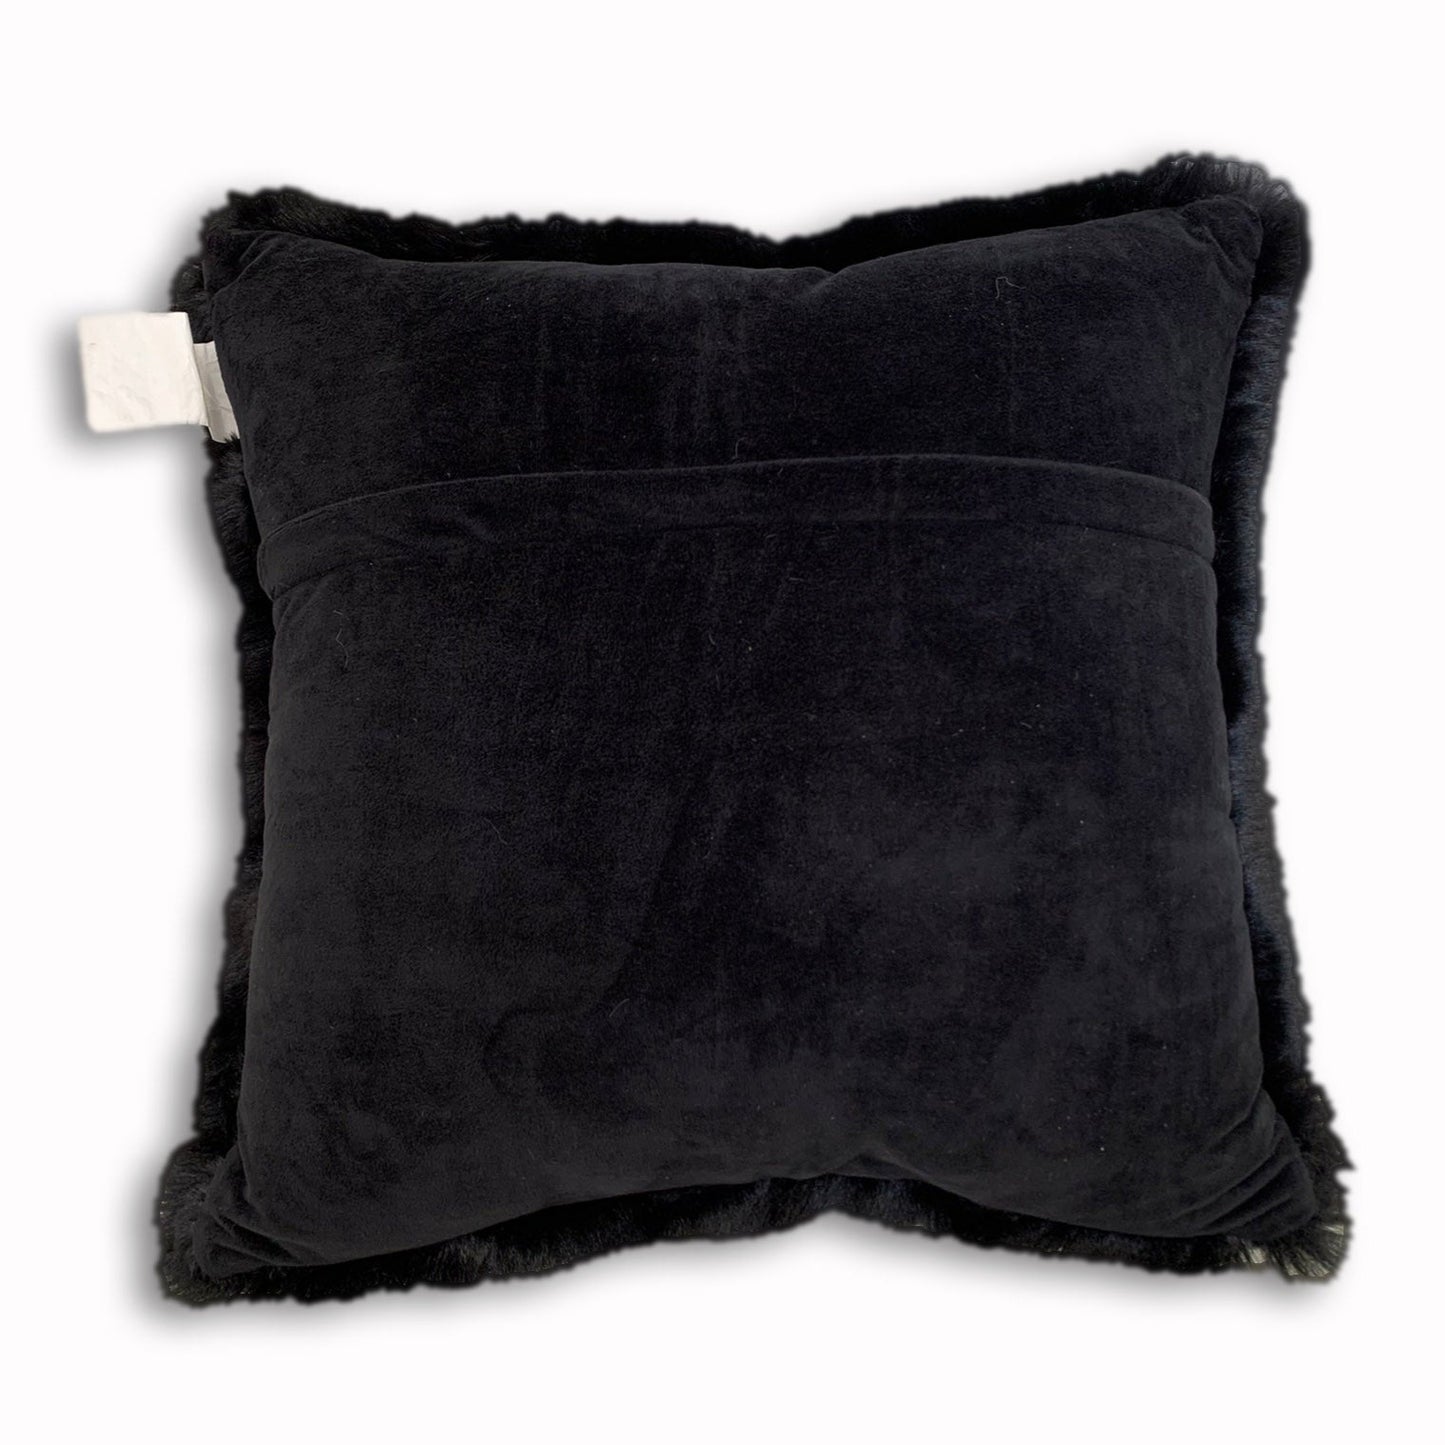 Soft Cozy Fuzzy Faux Fur Throw Pillow/ Positioner